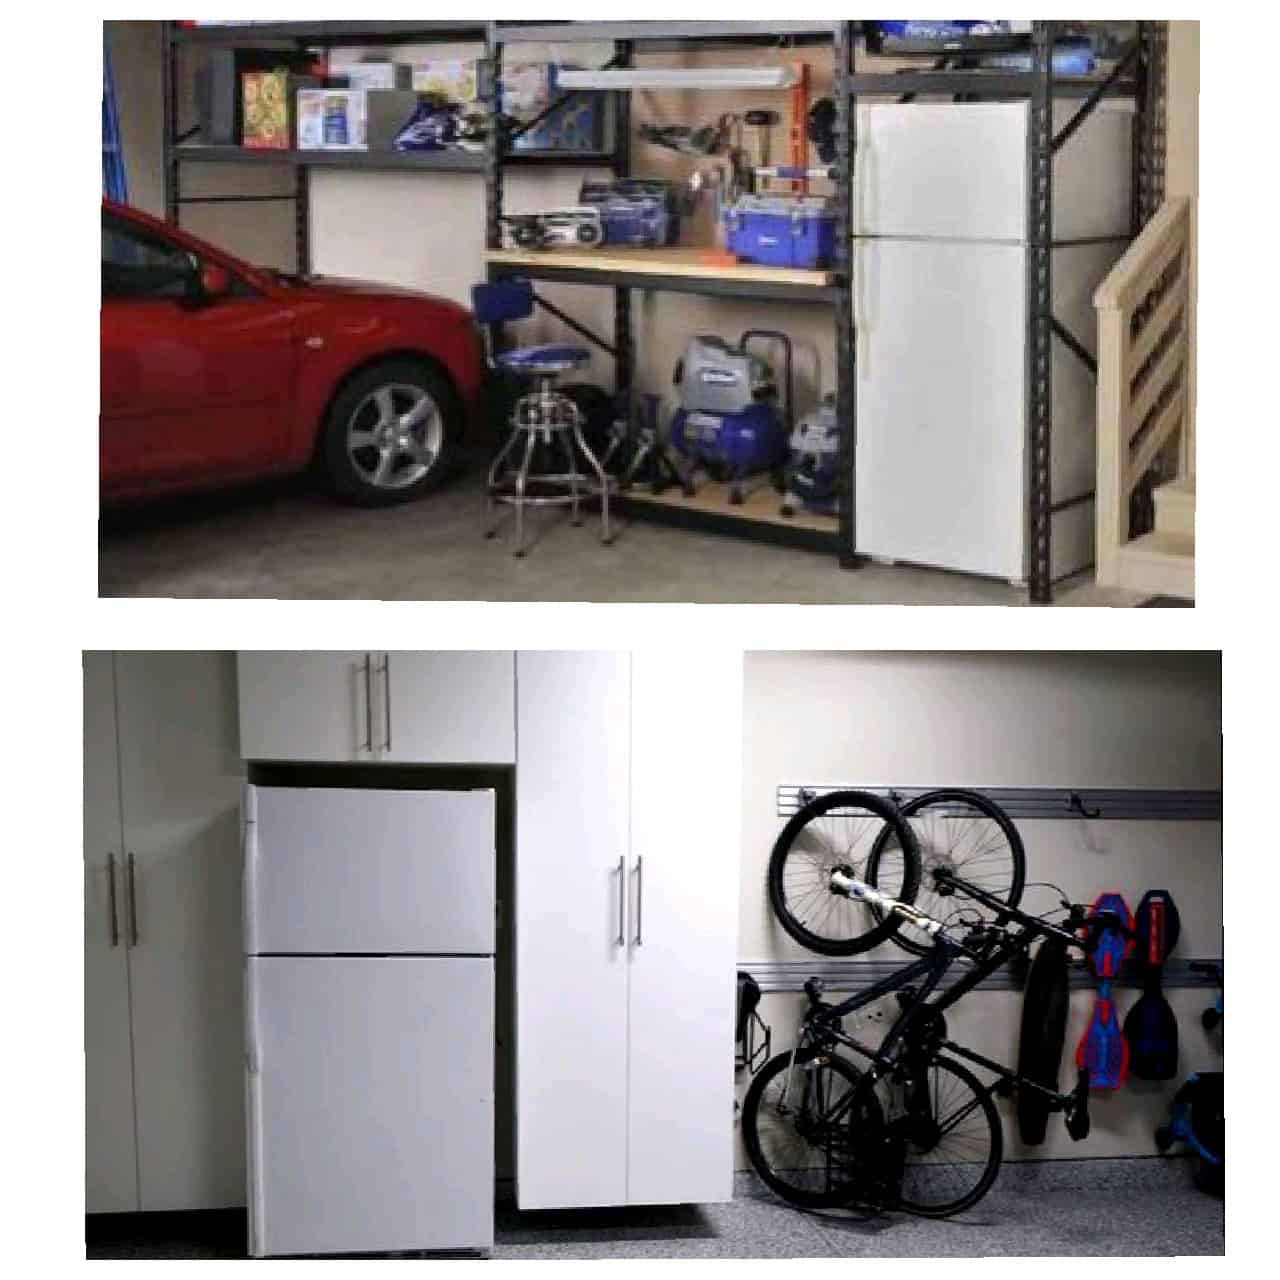 Unheated Garage Shed Or Outbuilding, Which Freezer Is Suitable For A Garage